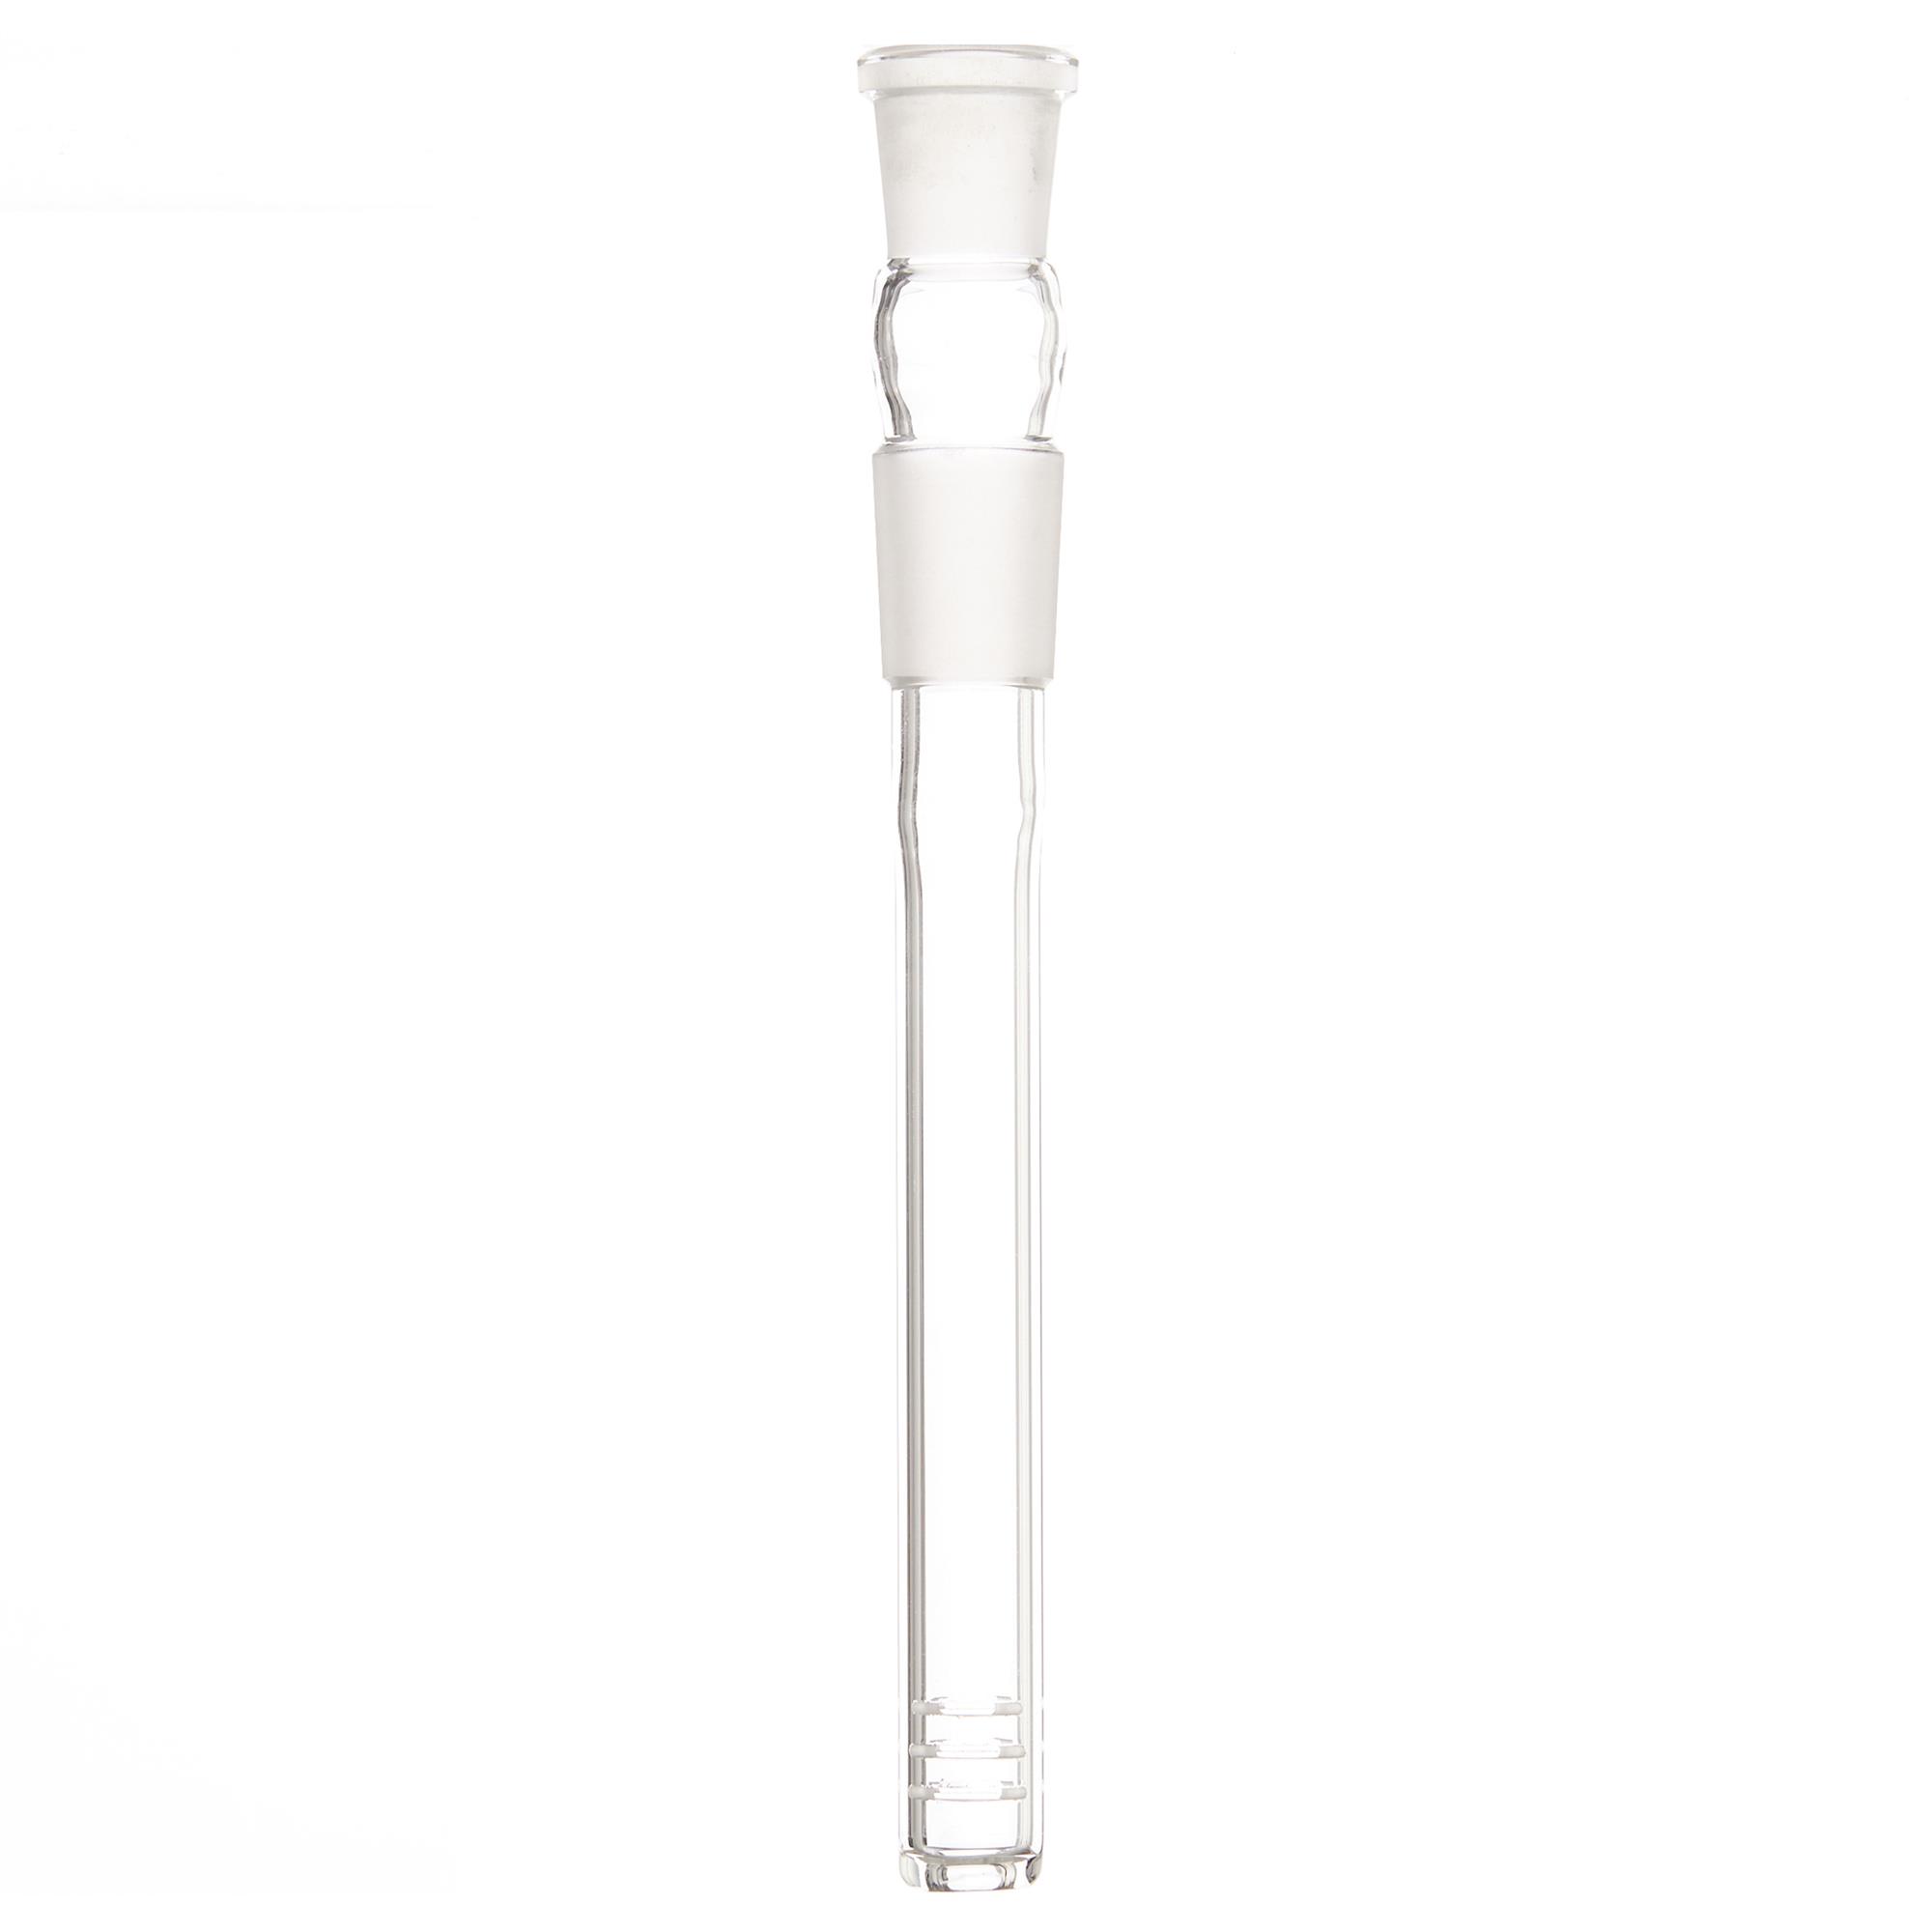 14MM TO 19MM DIFFUSER DOWNSTEM